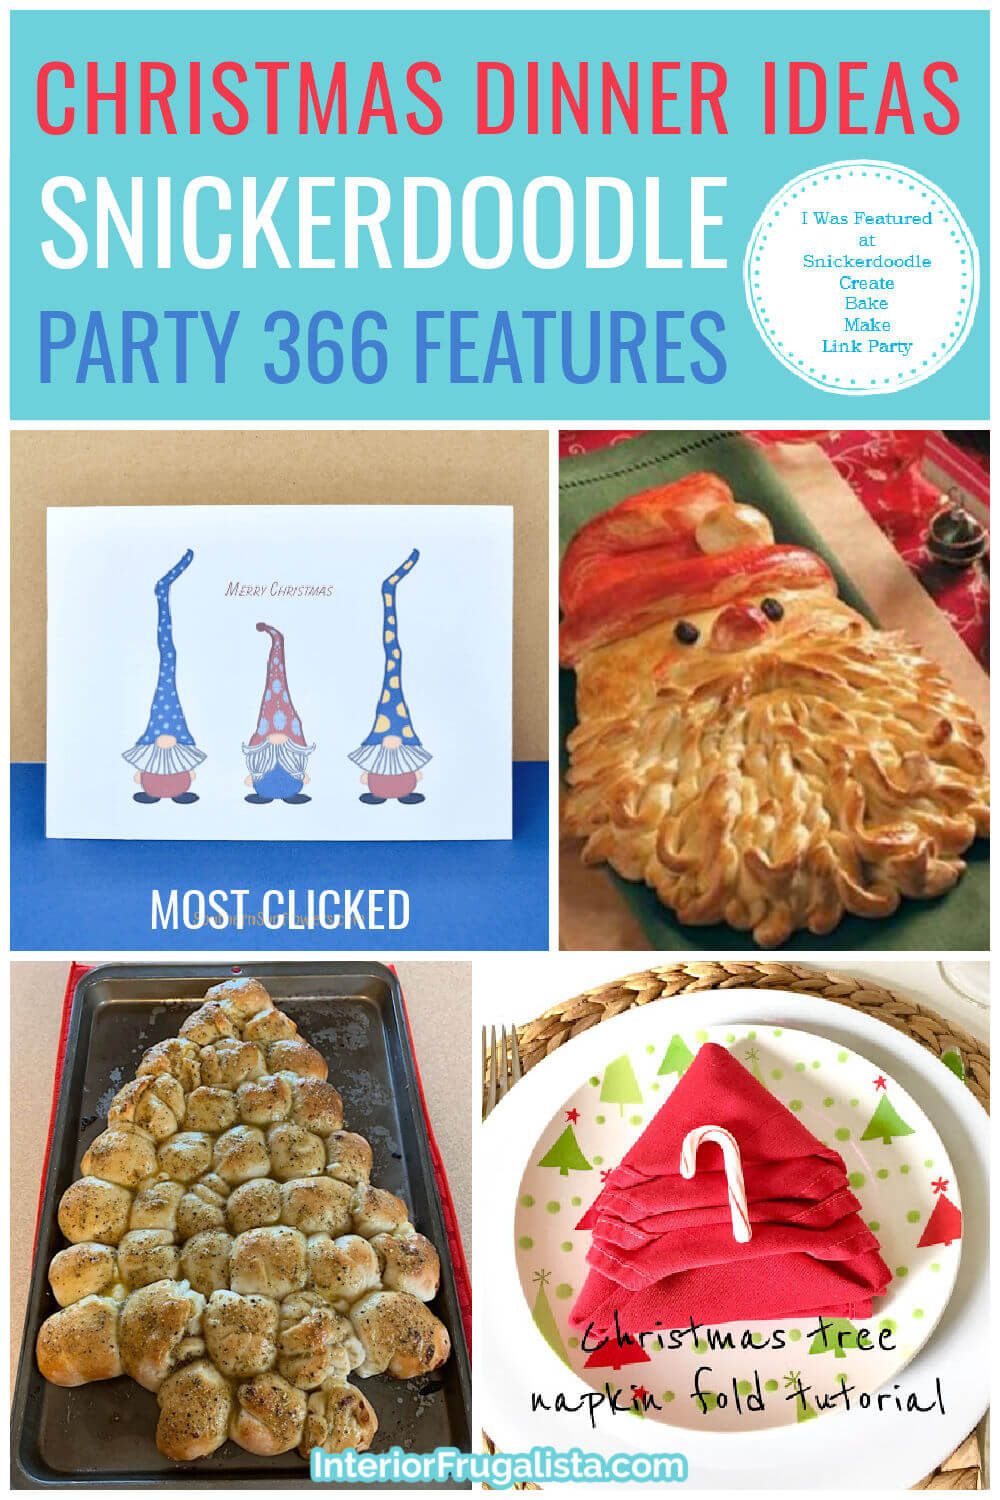 Christmas Dinner Ideas - Snickerdoodle Create Bake Make Link Party 366 Features co-hosted by Interior Frugalista #linkparty #linkpartyfeatures #snickerdoodleparty